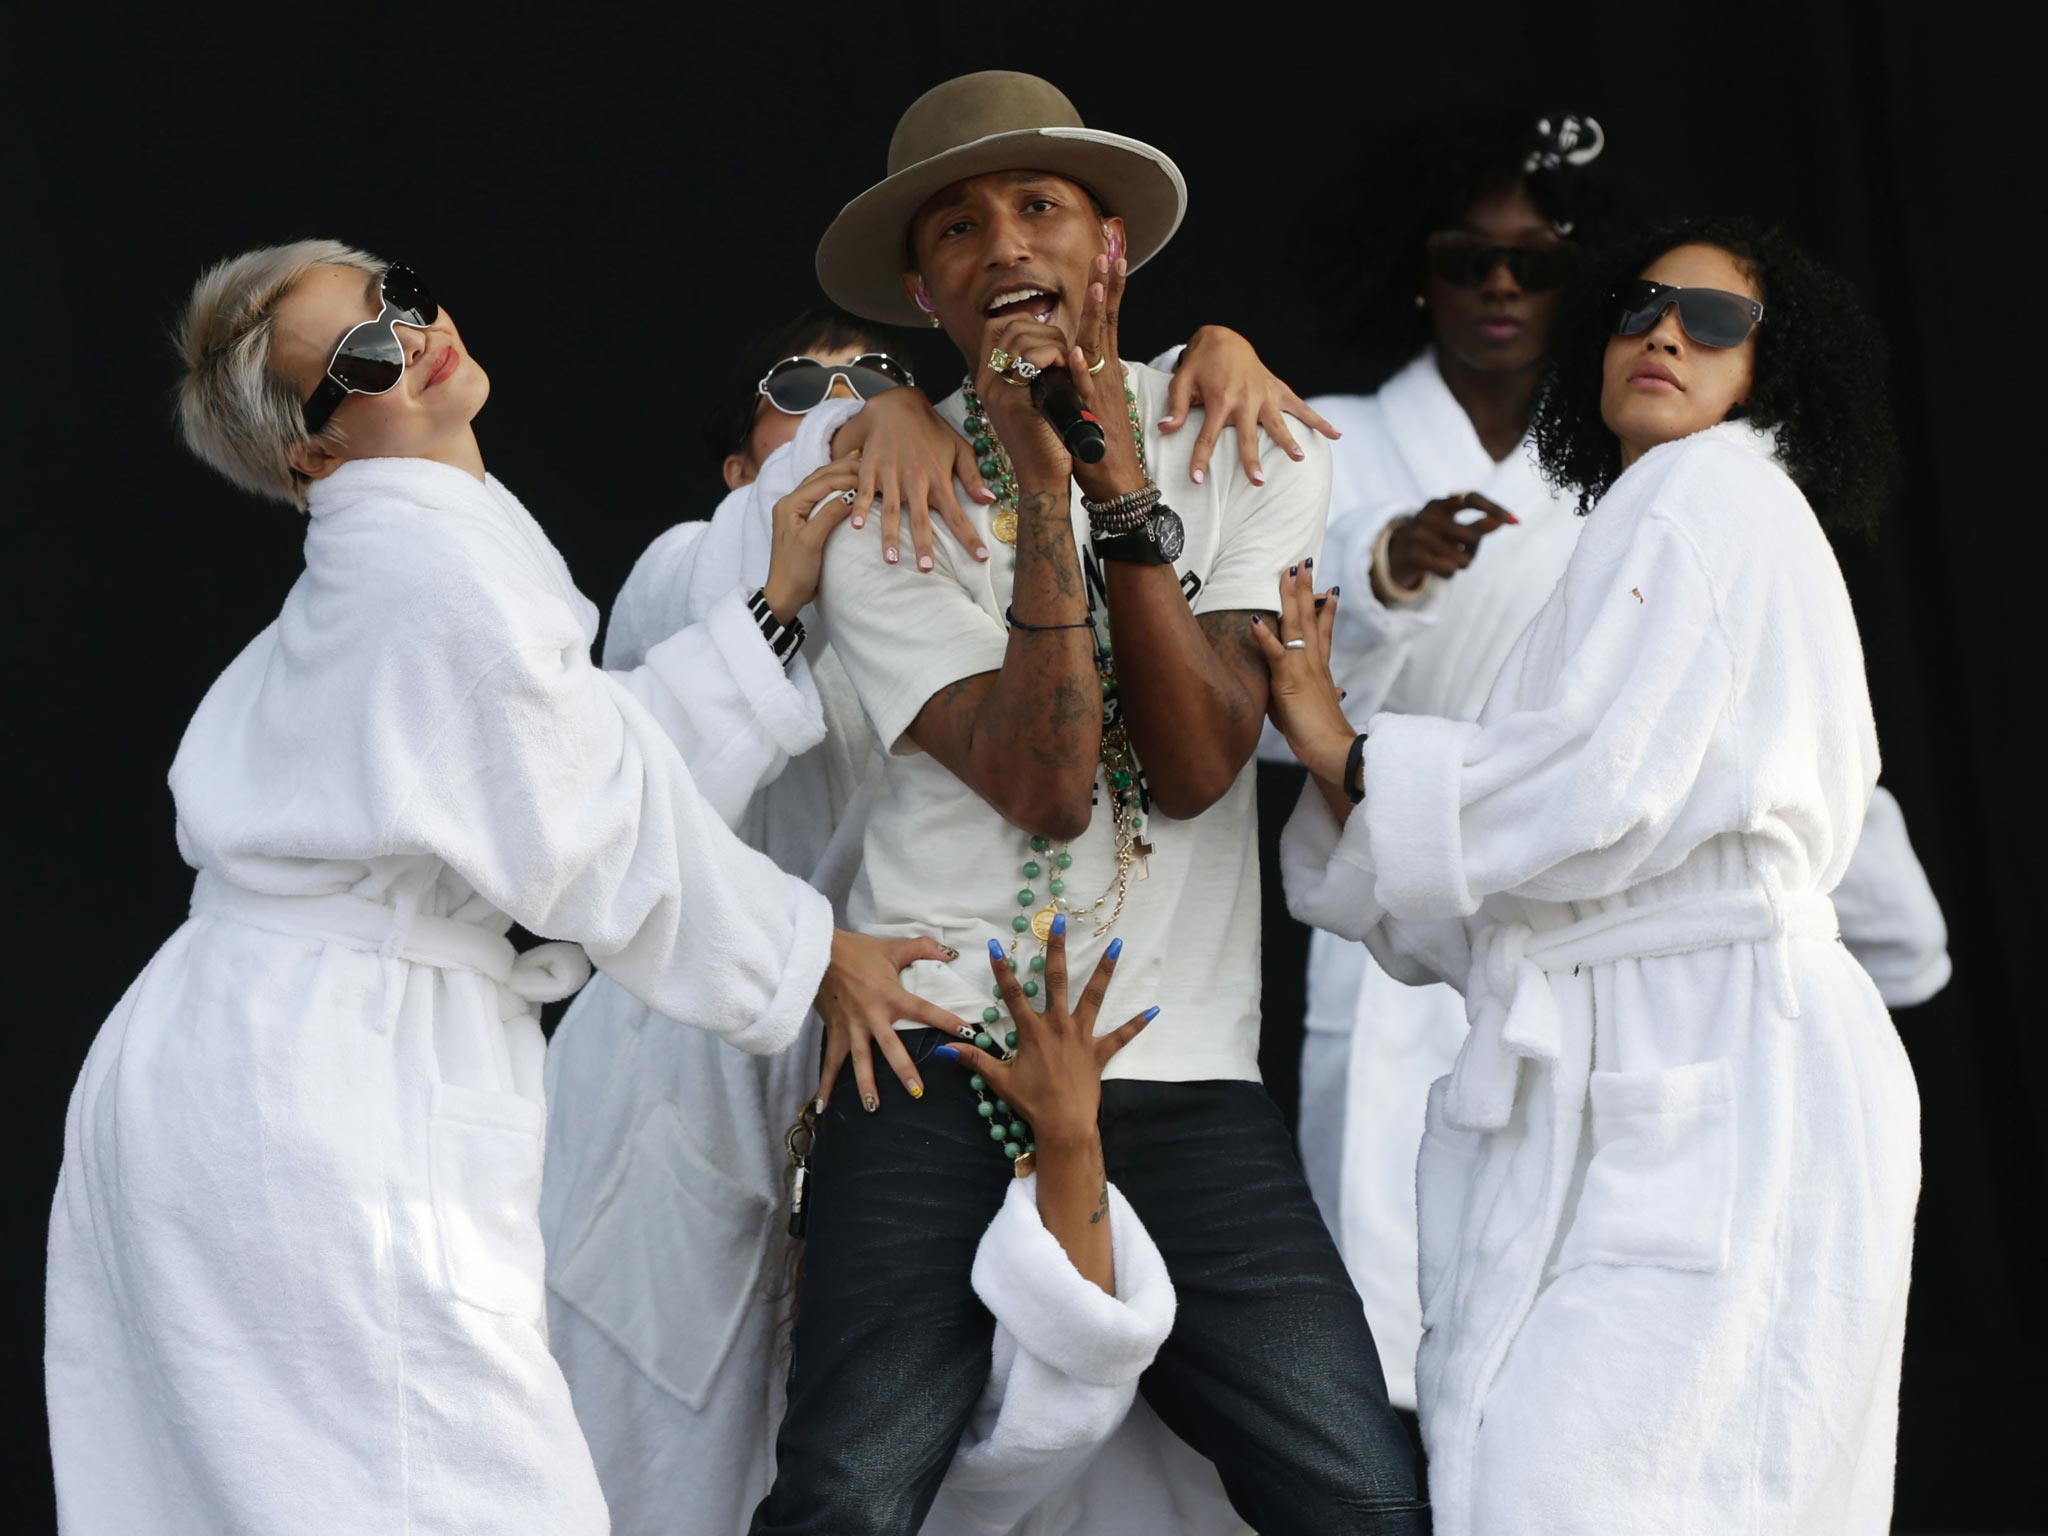 Pharrell Williams, here performing at the Wireless Festival in London's Finsbury Park